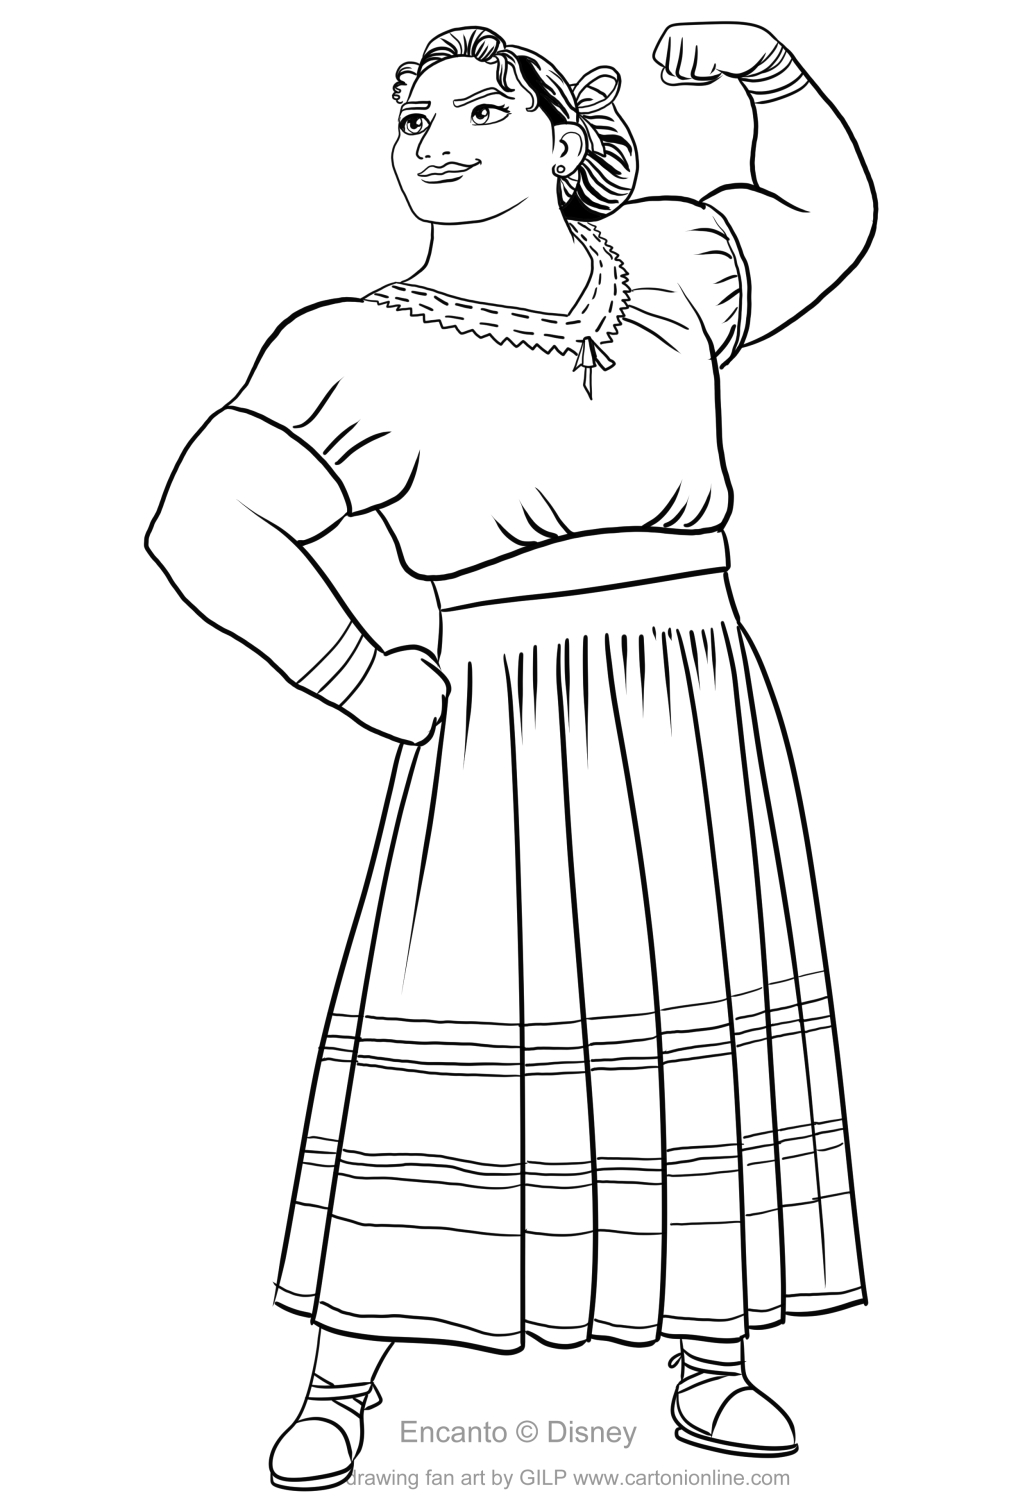 Luisa Madrigal from Encanto coloring page to print and coloring